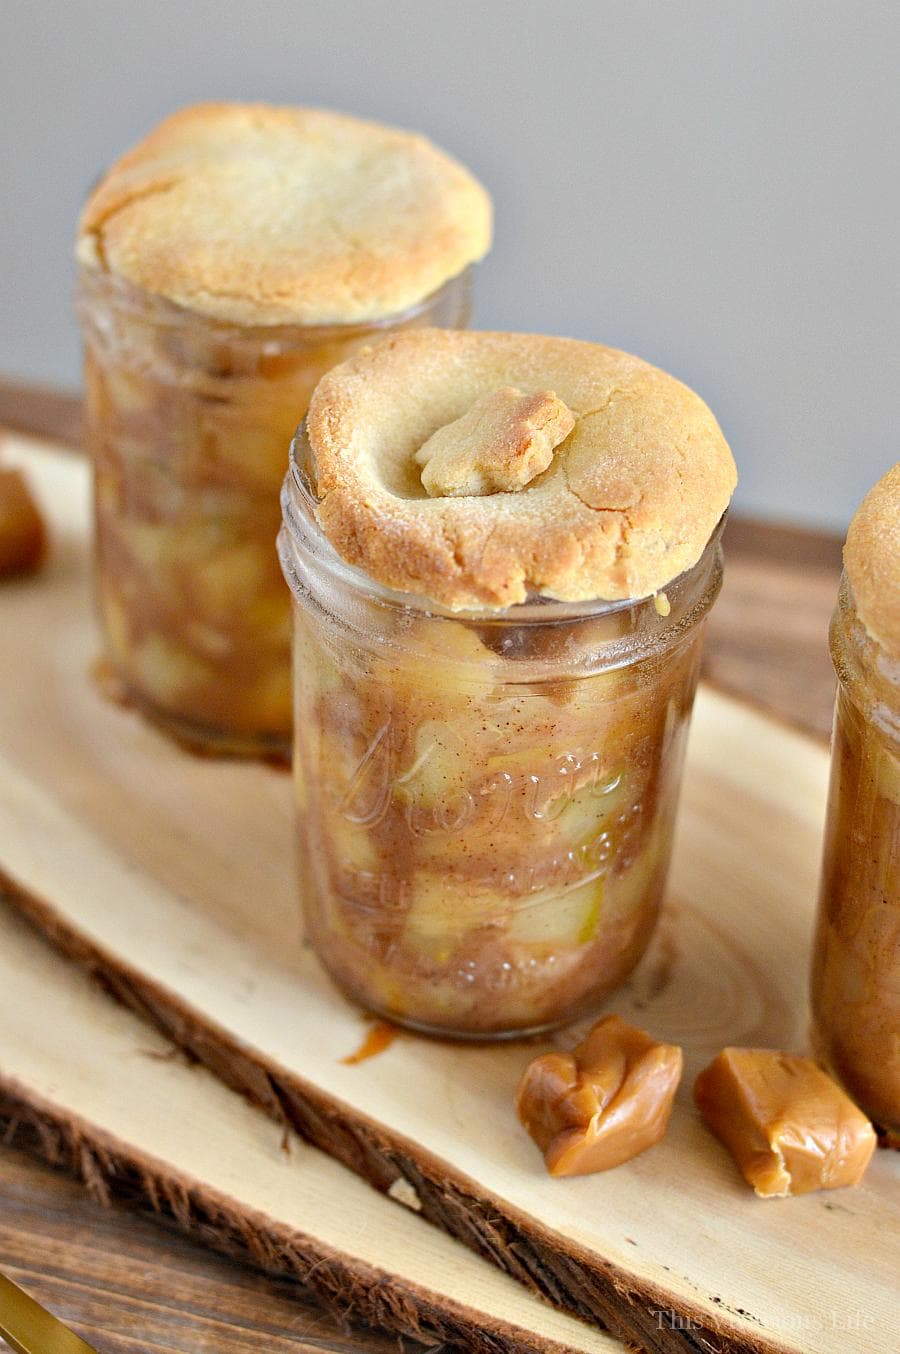 These gluten-free caramel apple pear mason jar pies are perfect for summer and especially for the 4th of July! They have all the summer flavors you love in personal size containers. Enjoy this dessert with minimal clean up at your next BBQ.